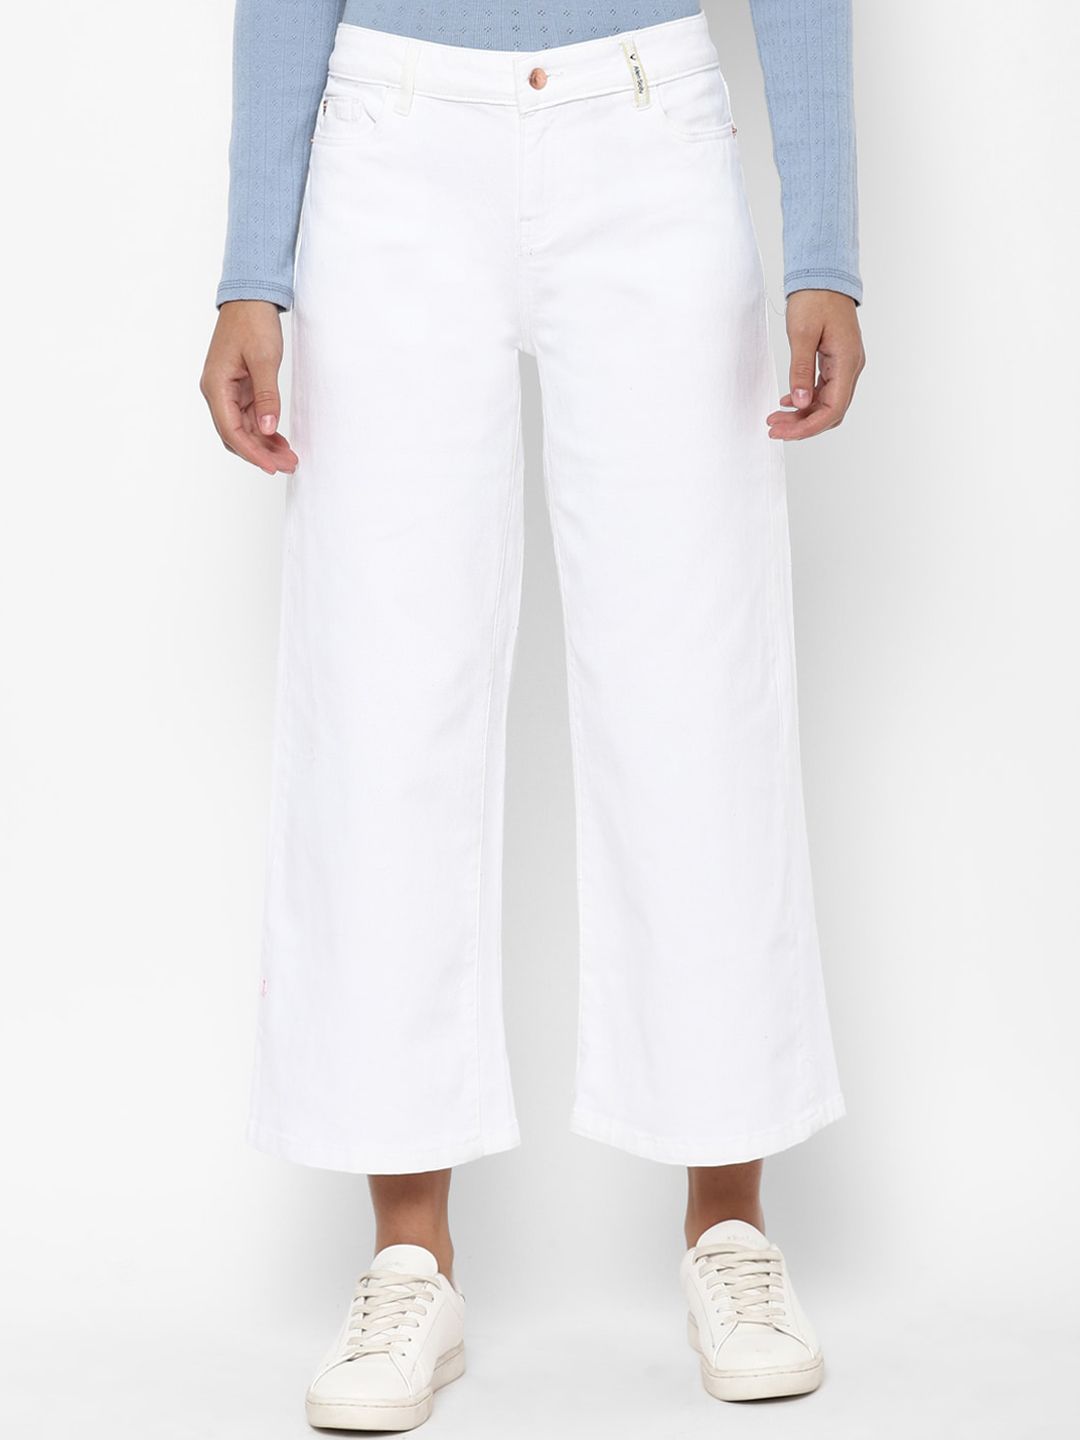 Allen Solly Woman Women White Mid-Rise Jeans Price in India